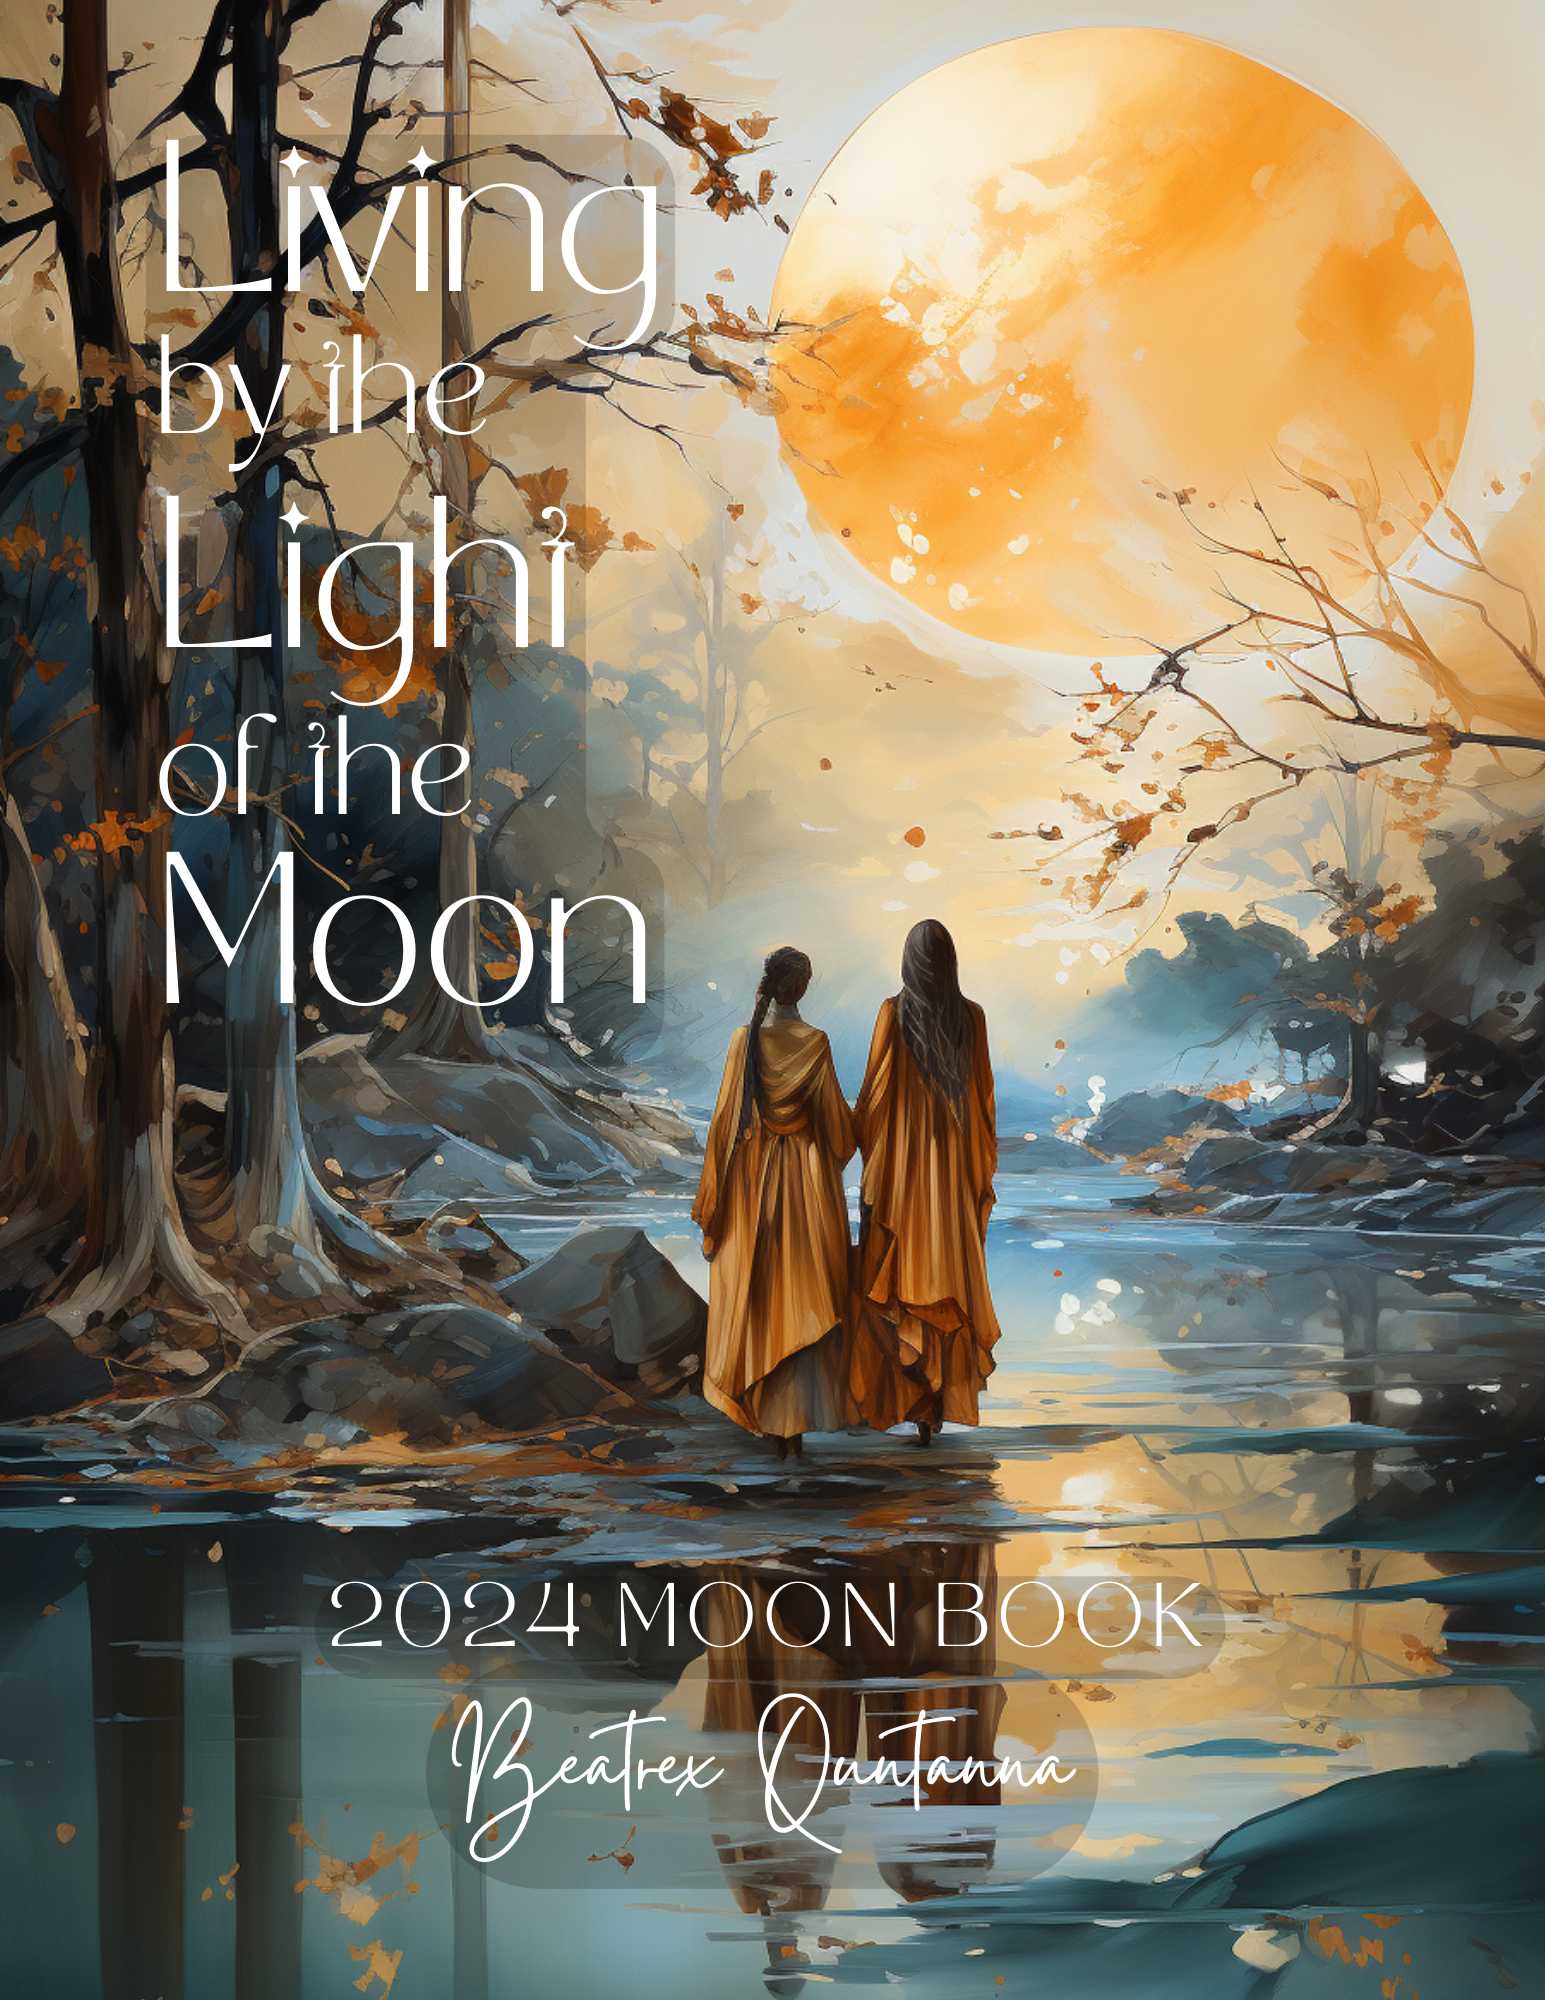 The Moon Book 2024